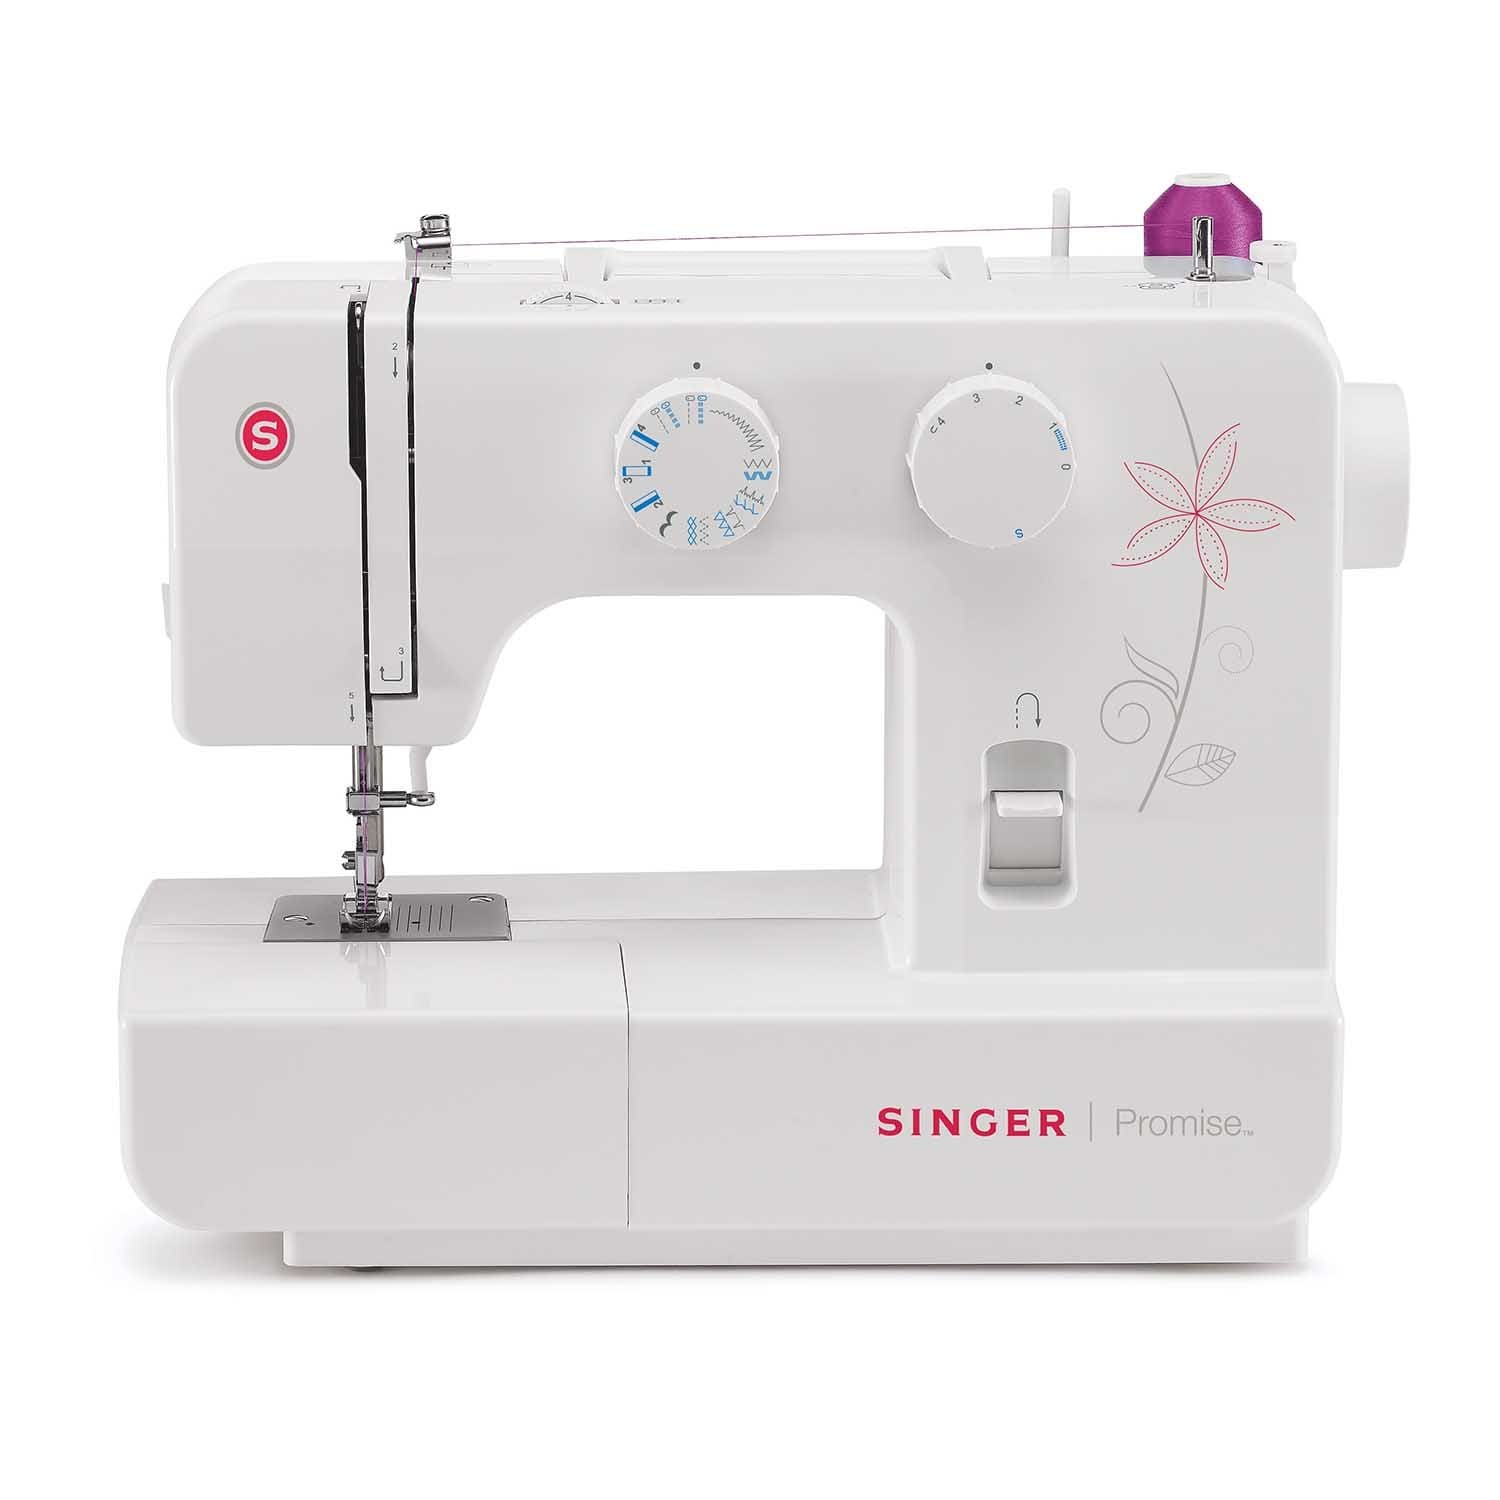 SINGER PROMISE MECHANICAL SEWING MACHINE  - 1412